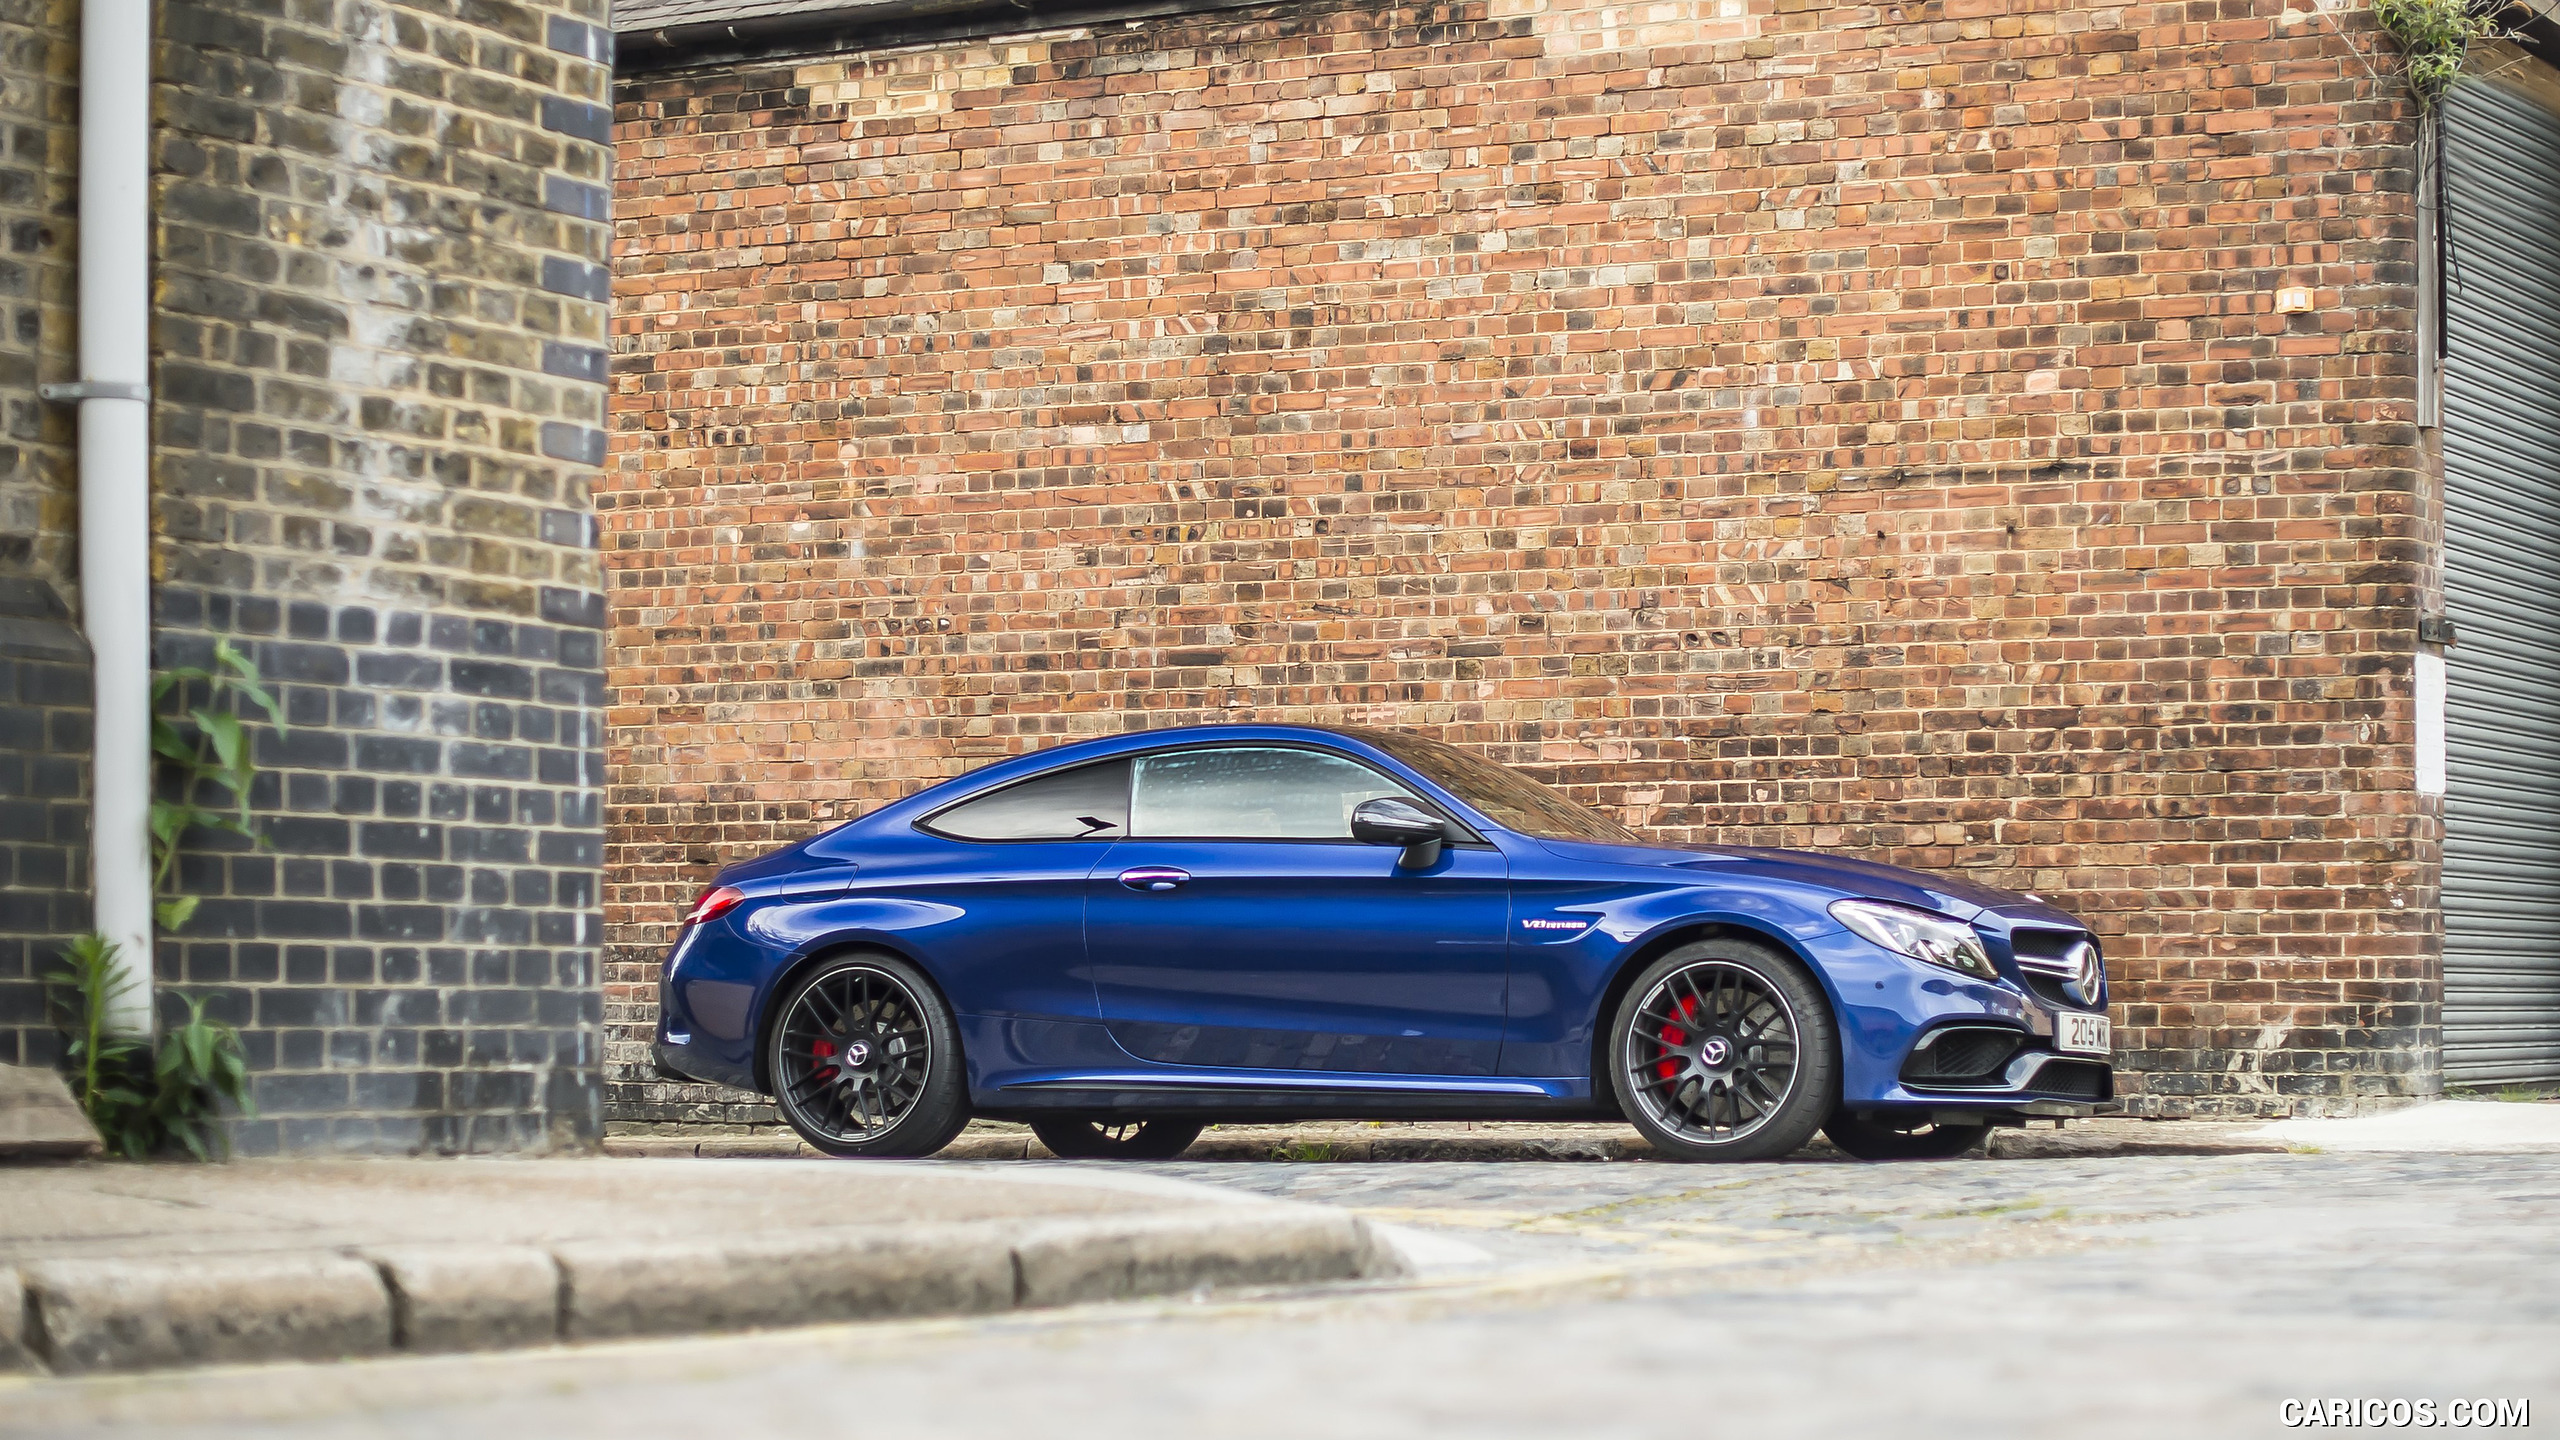 2017 Mercedes-AMG C63 S Coupe (UK-Spec) - Side, #18 of 52